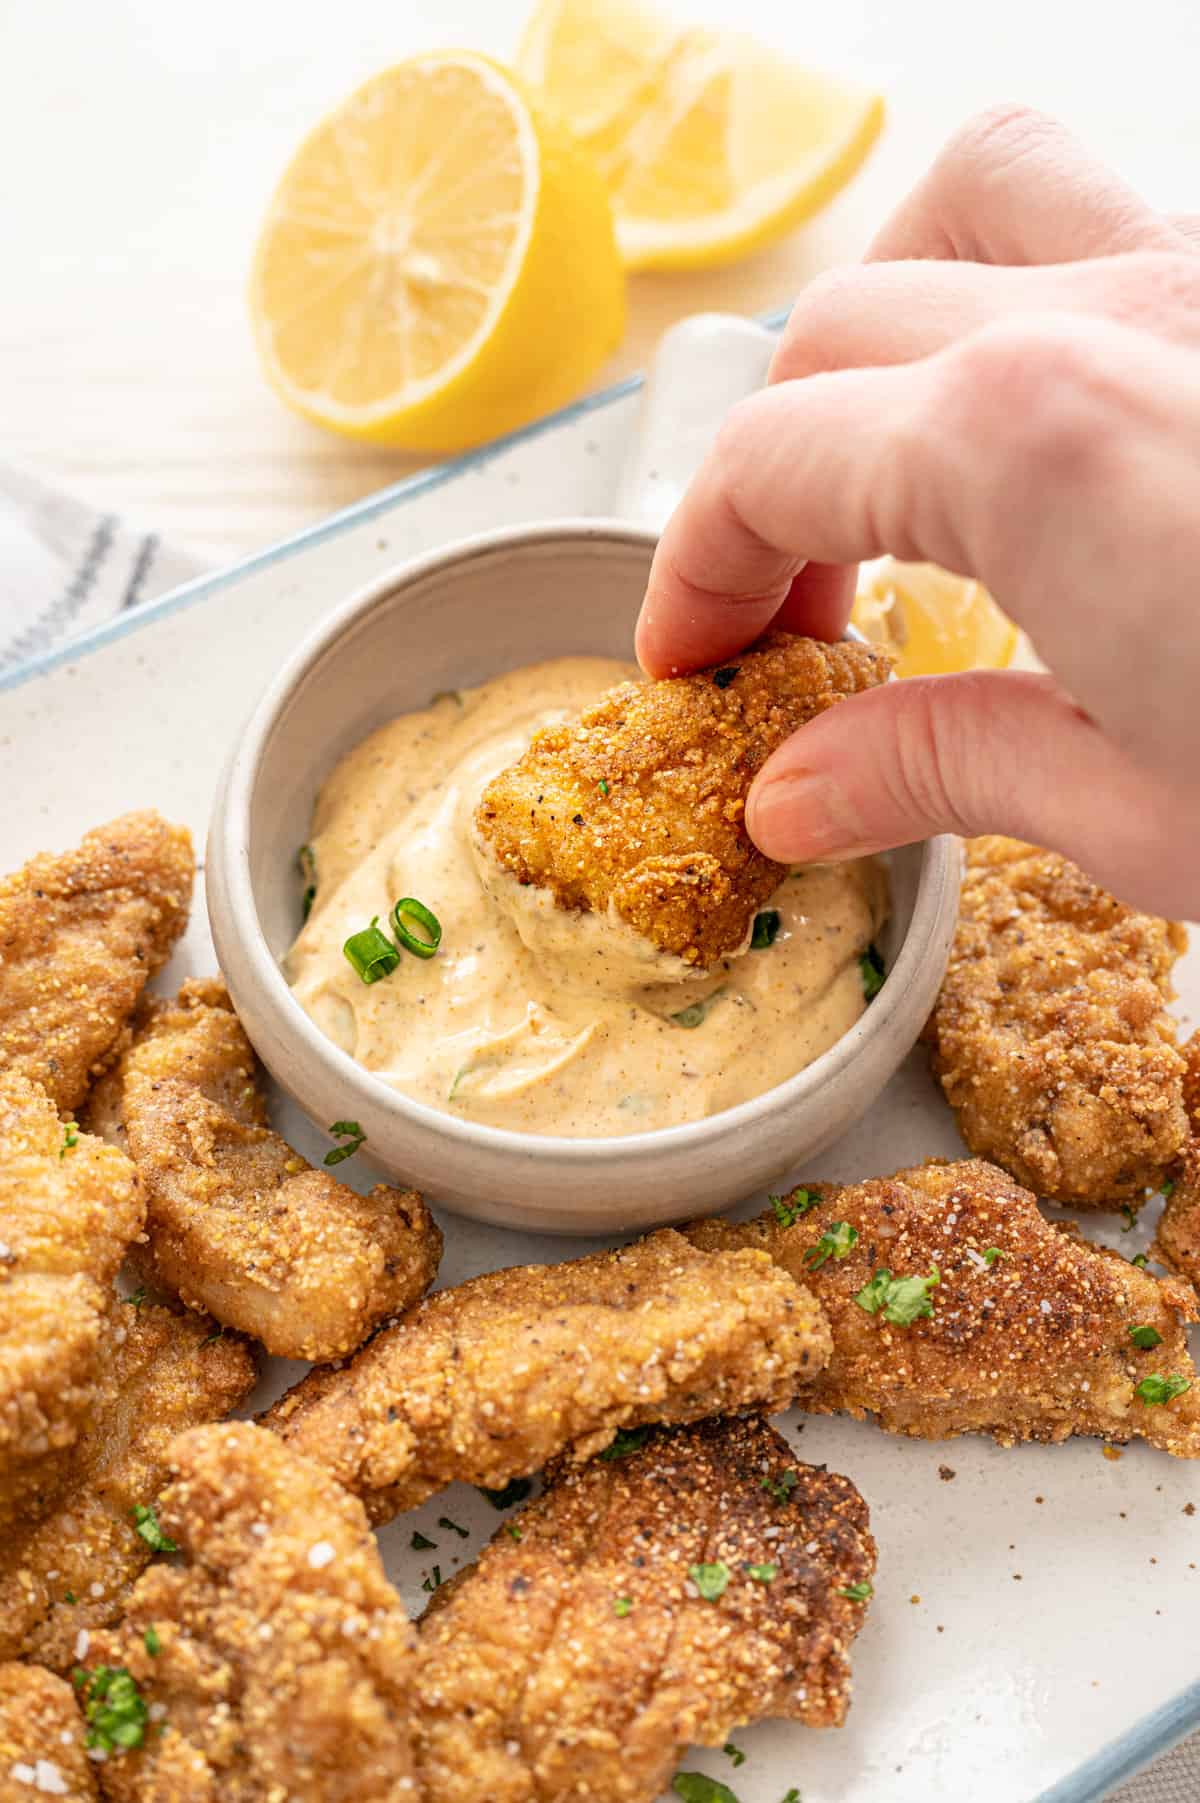 A catfish nugget being dipped in cajun remoulade sauce.